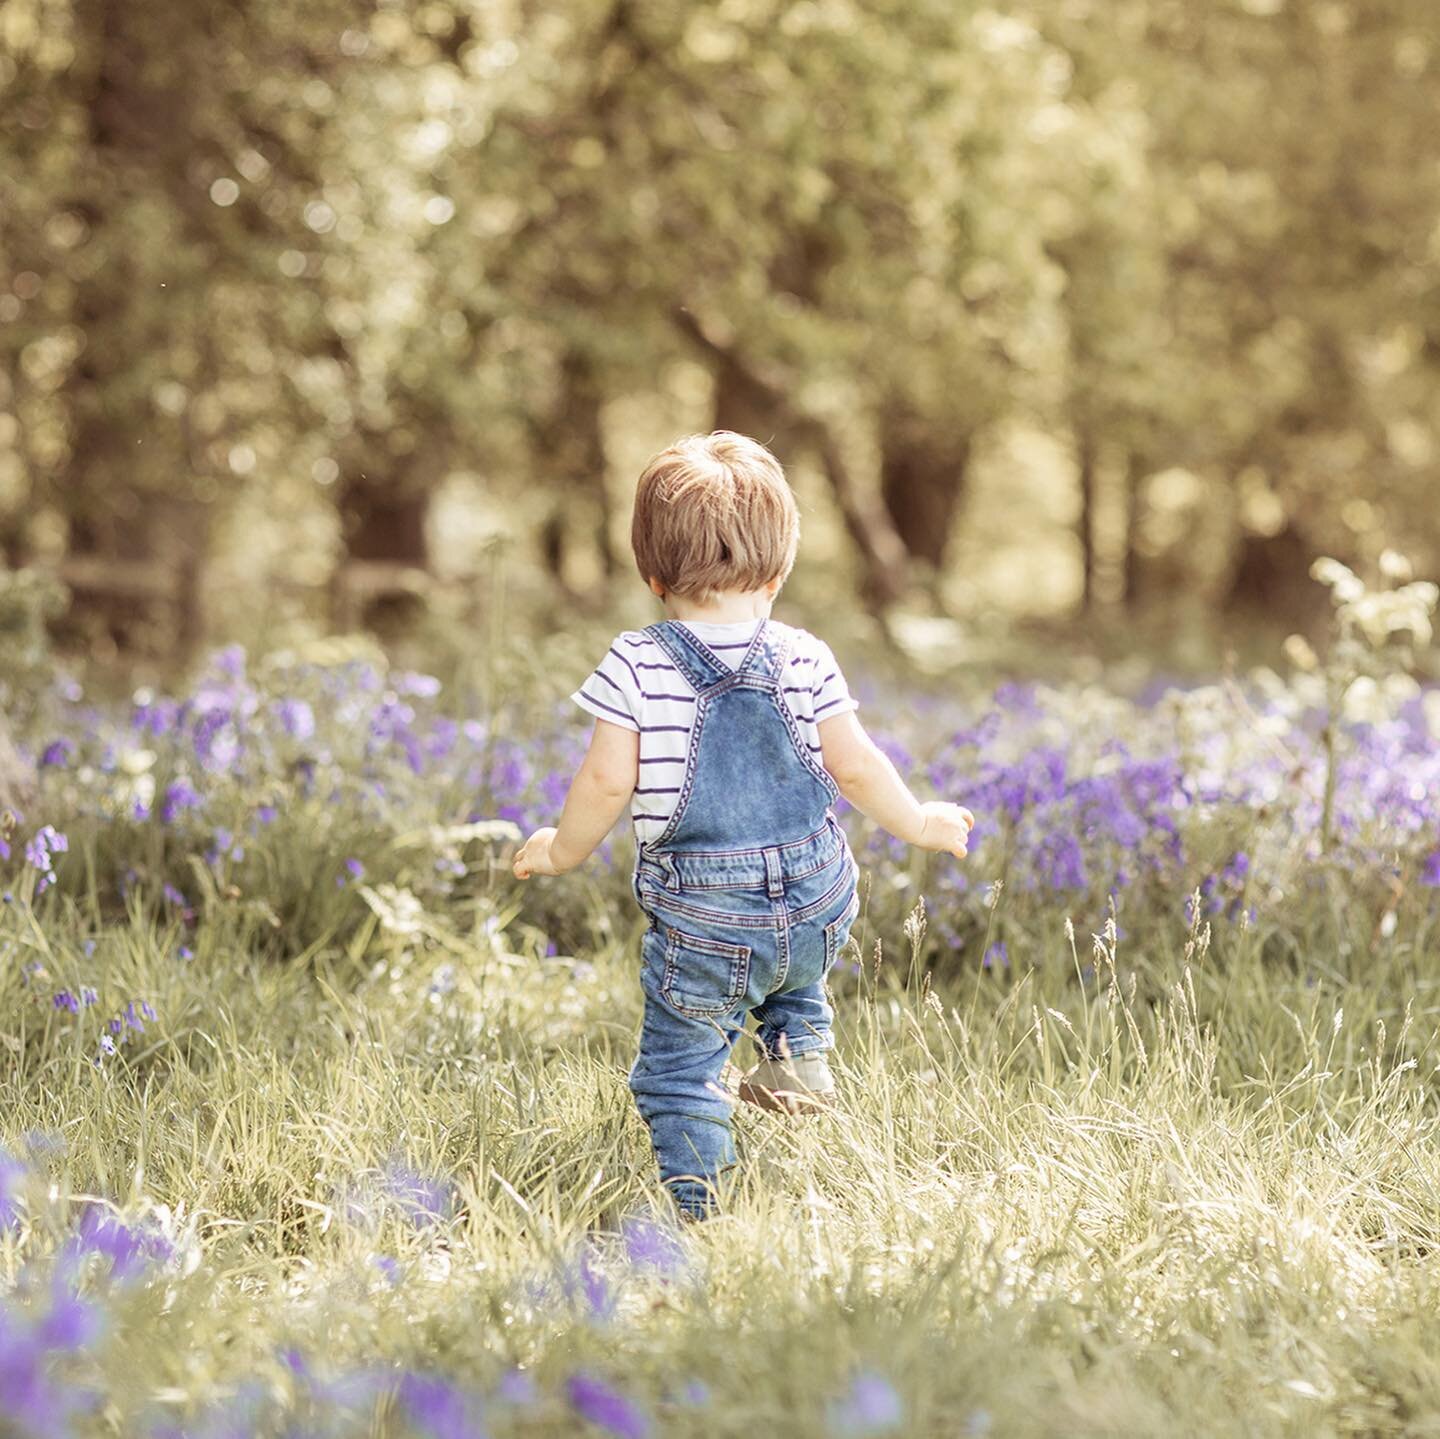 Over on the blog&hellip; My top five tips for happy kids at photoshoots, link in bio.

And it finally feels like Spring is in the air! I cannot wait to be back here @ashridgehouse for my outdoor sessions to start again, the bluebells have become my s